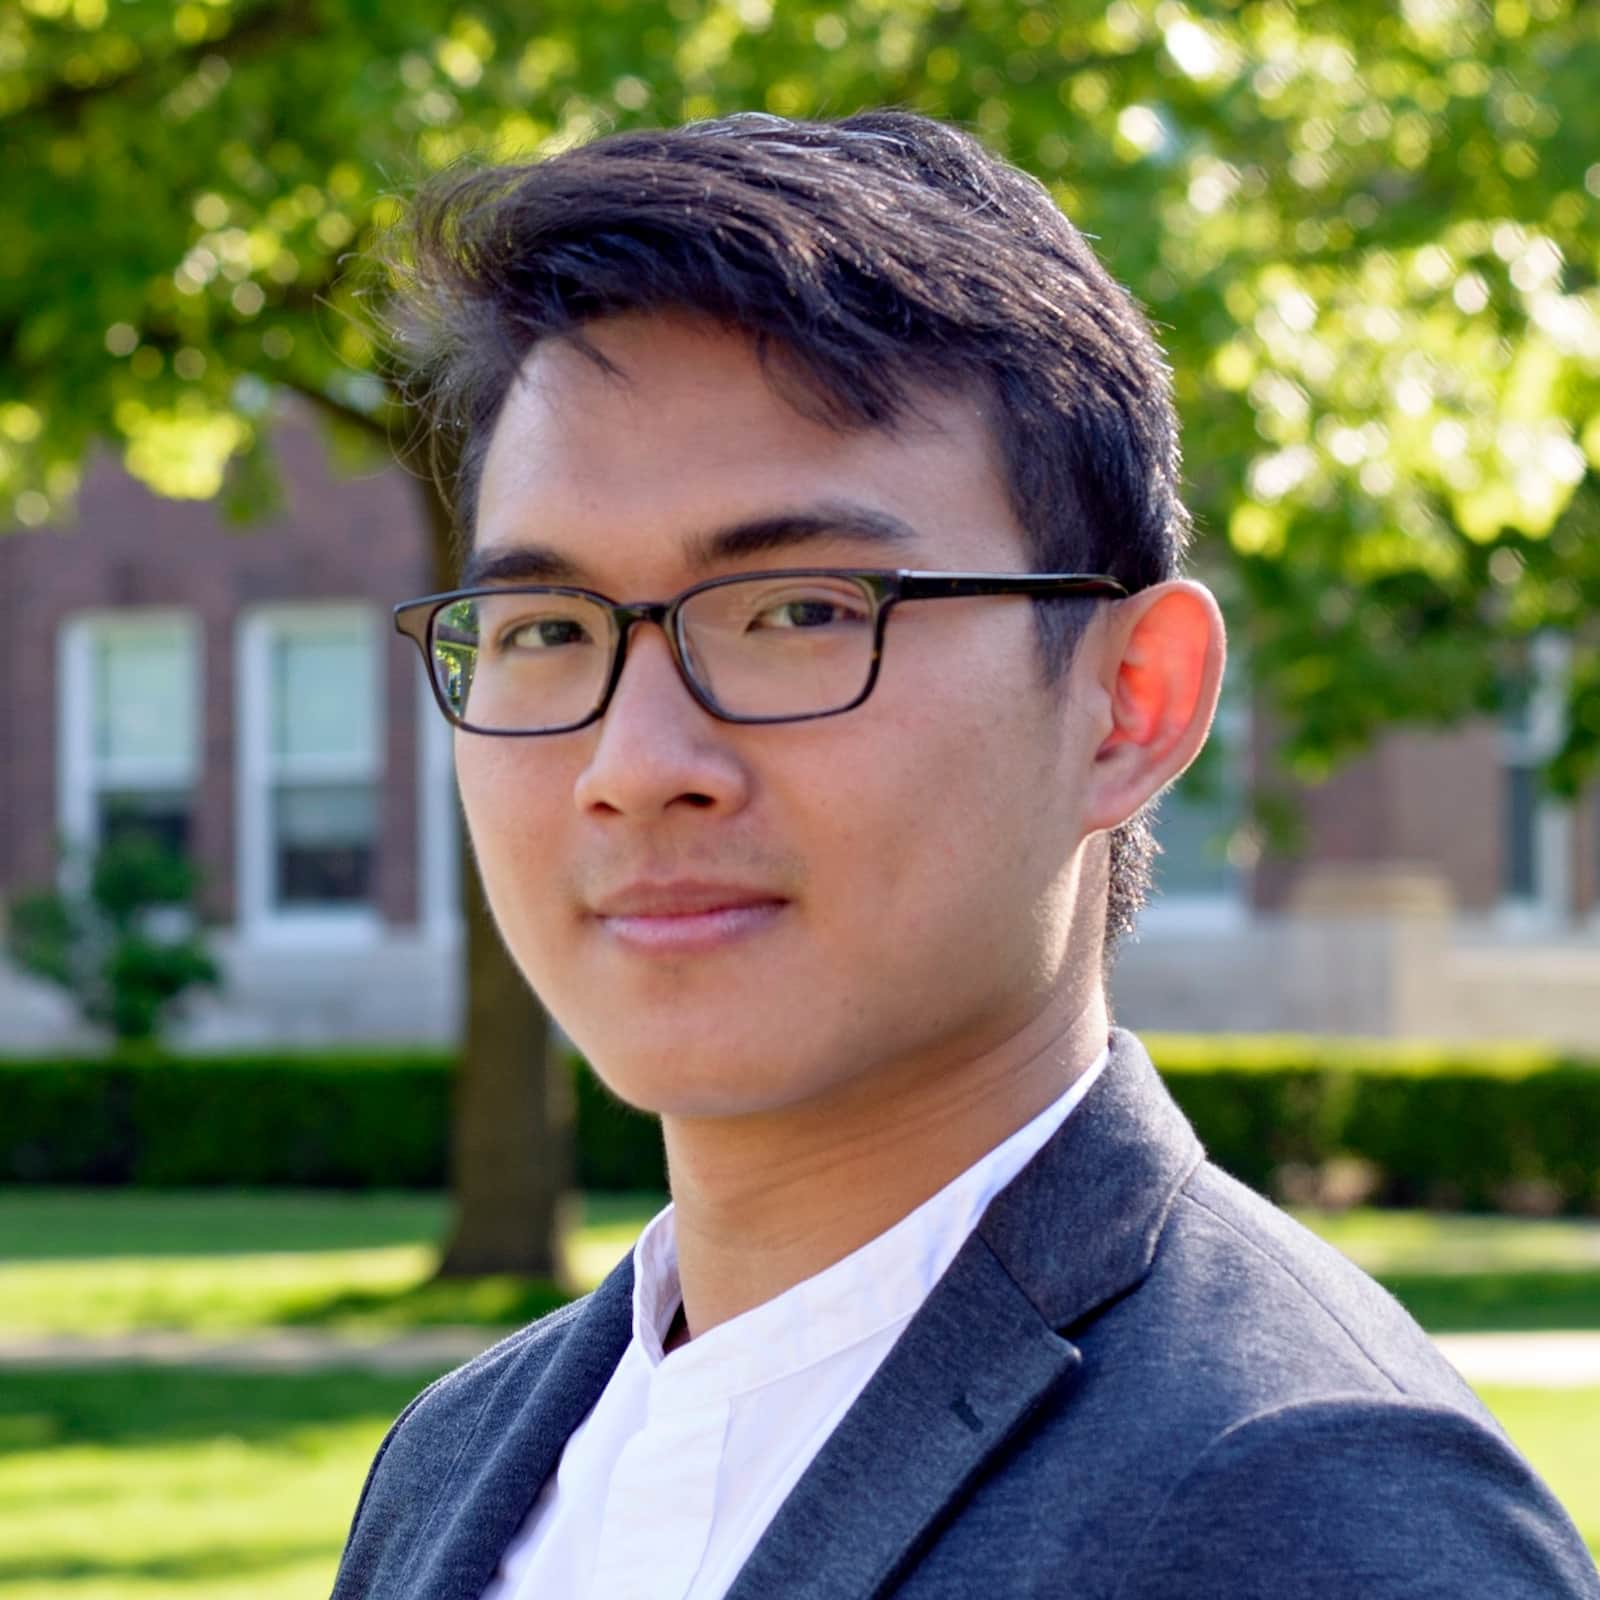 Eugene Lim, Cybersecurity Specialist who secured 6th place in the global Facebook challenge